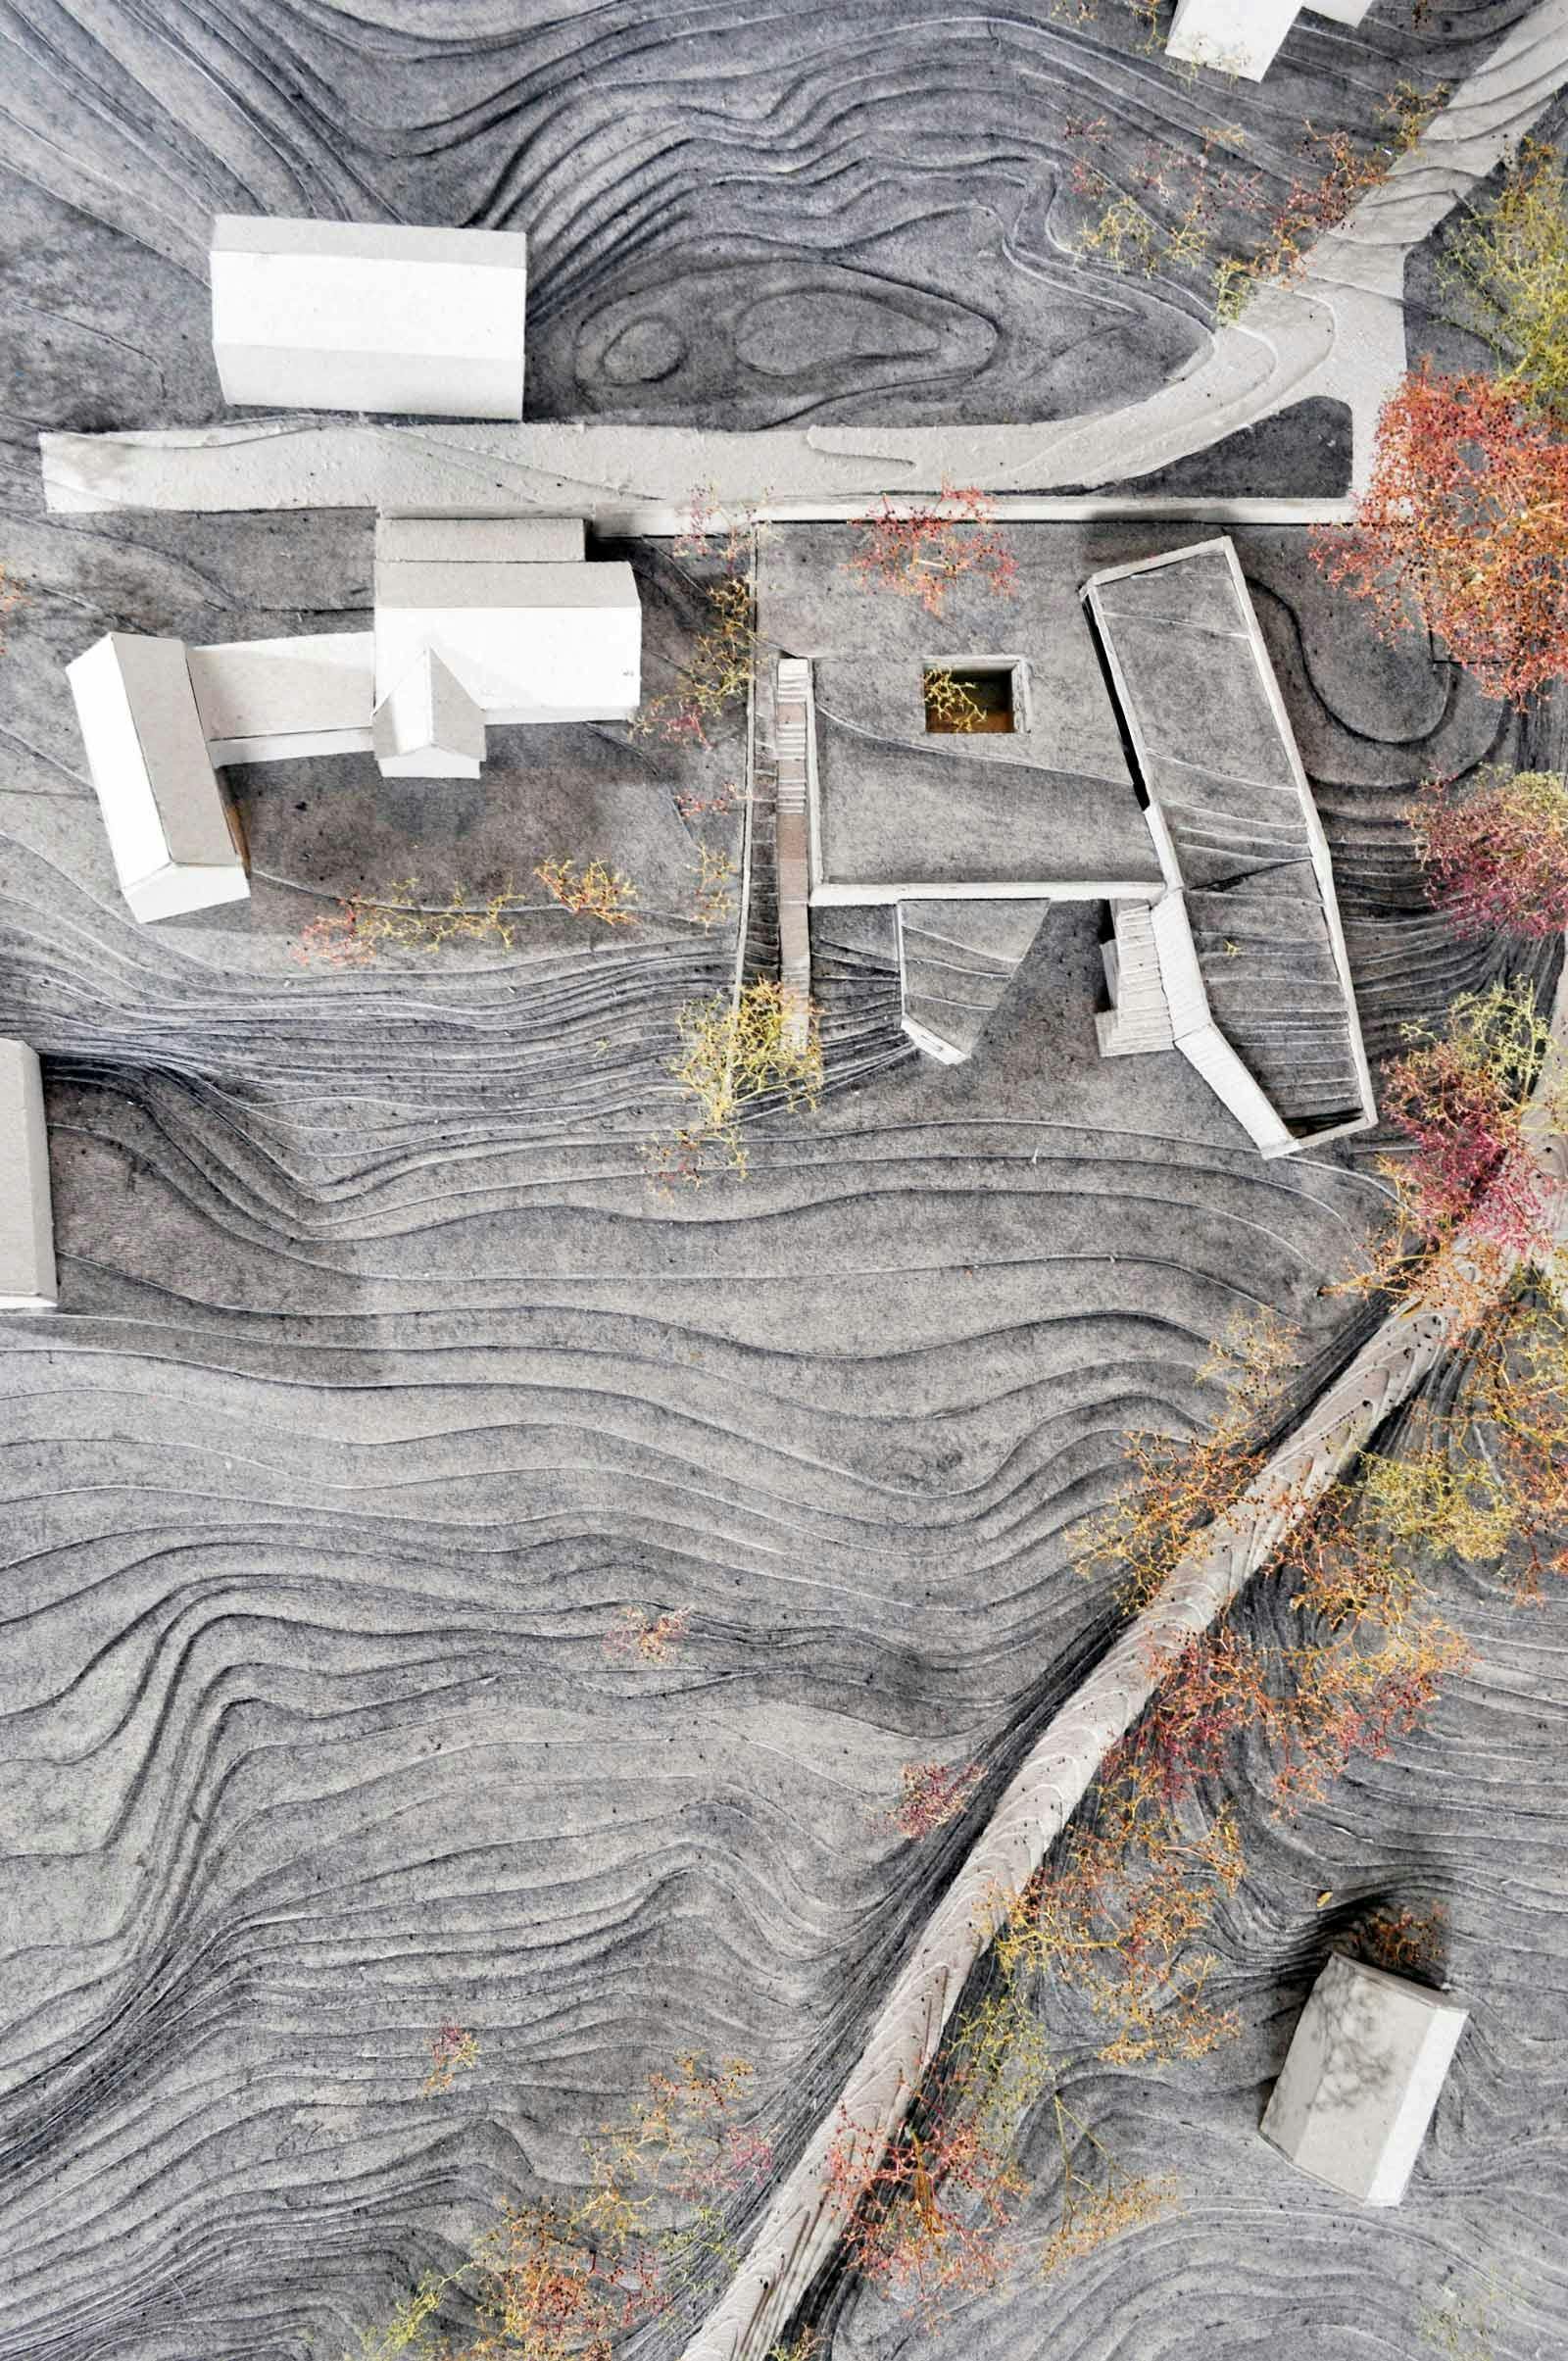 Architectural model with view from above of house embedded in landscape